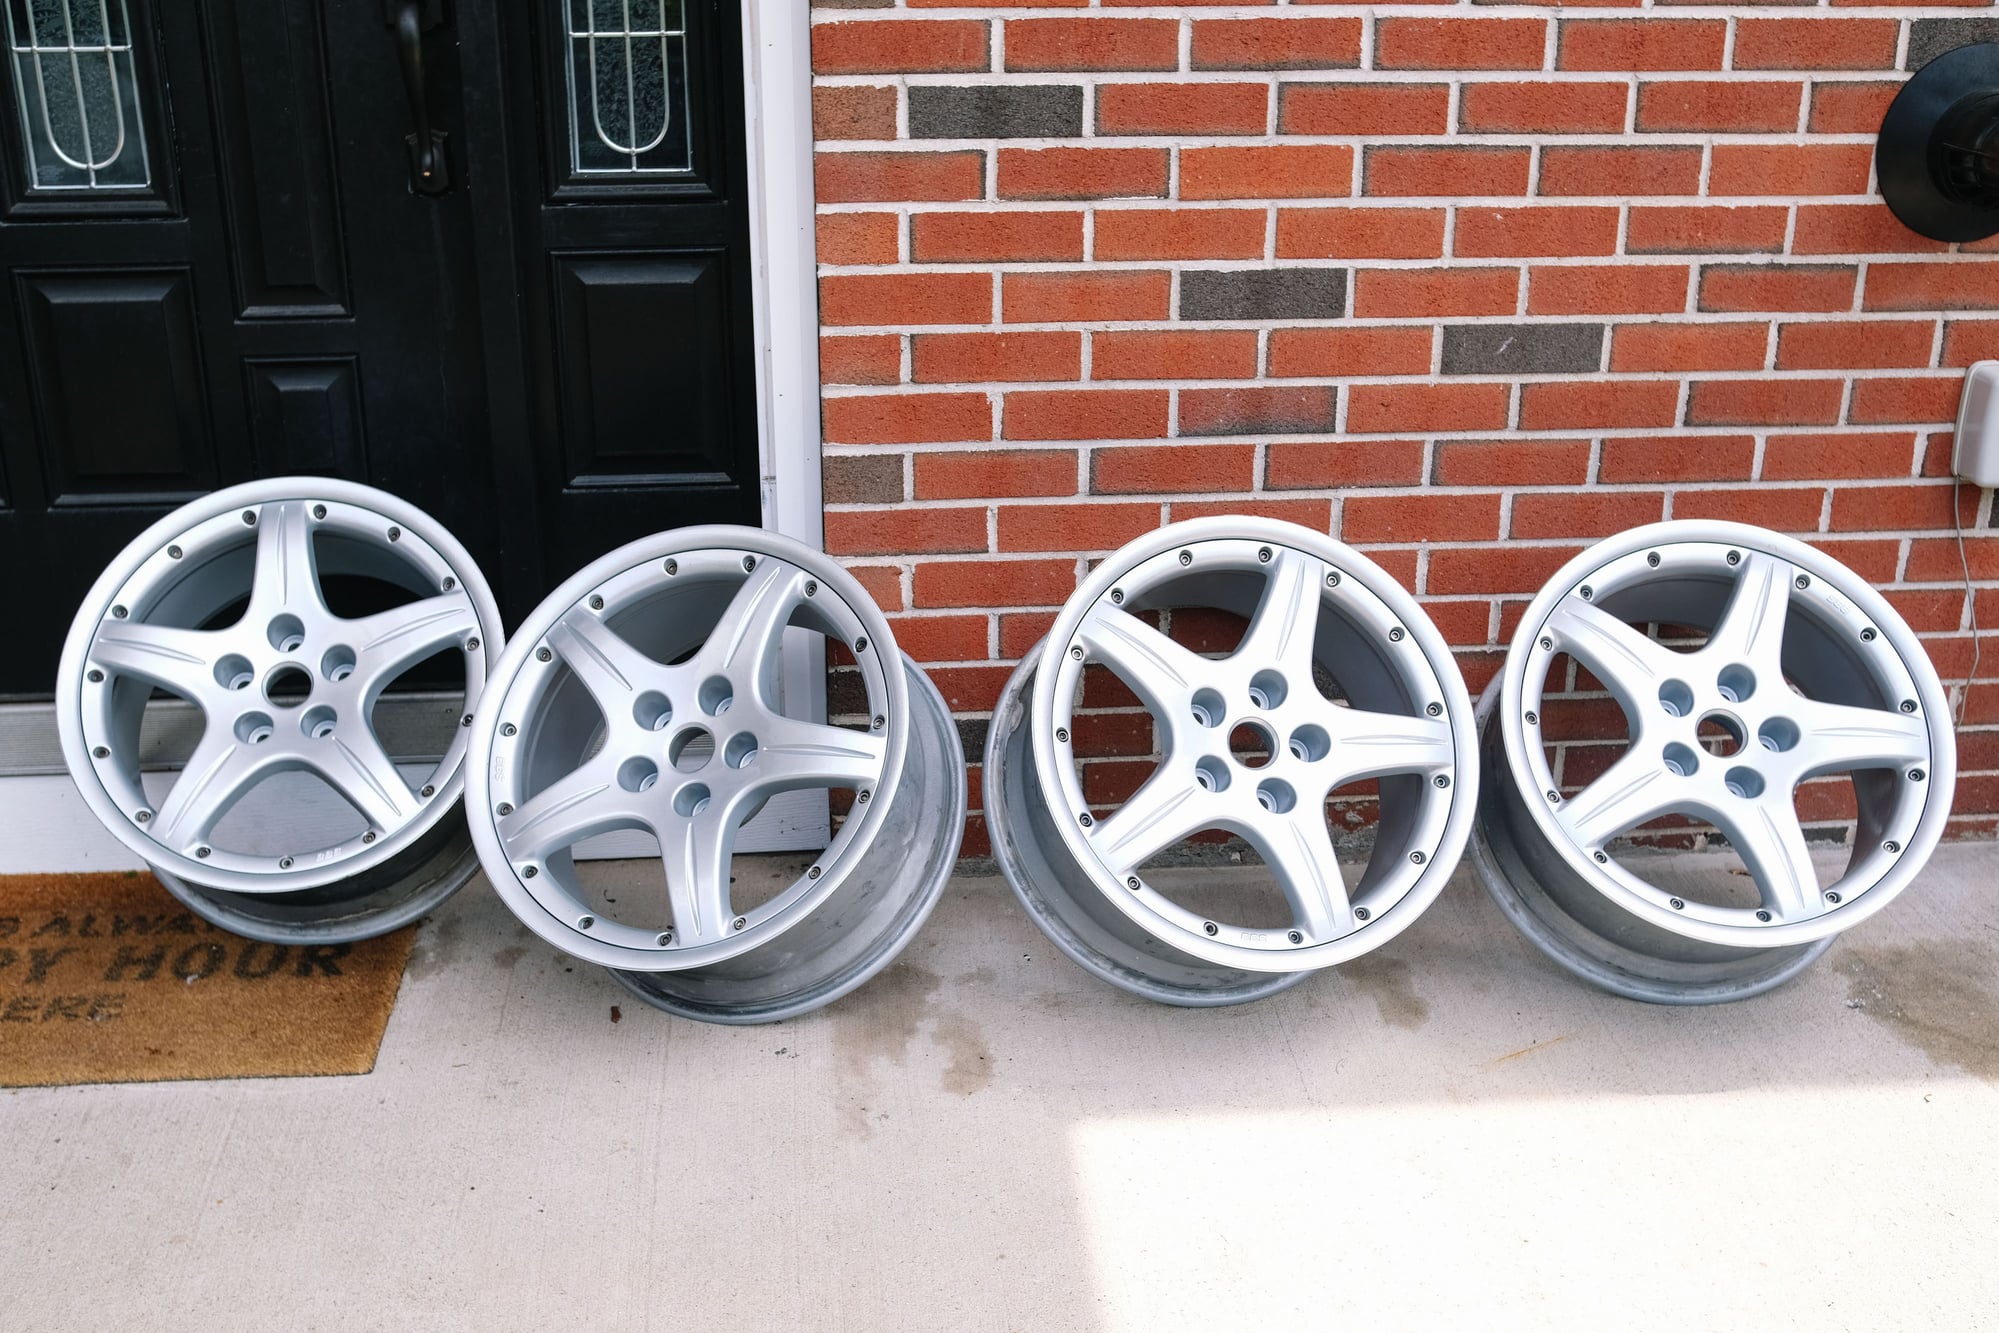 Wheels and Tires/Axles - BBS Oyster(Jaguar XJR) 18x8.5, Recently Powder Coated, Not Perfect - Used - 1989 to 2001 Jaguar XJ - East Berlin, CT 06023, United States